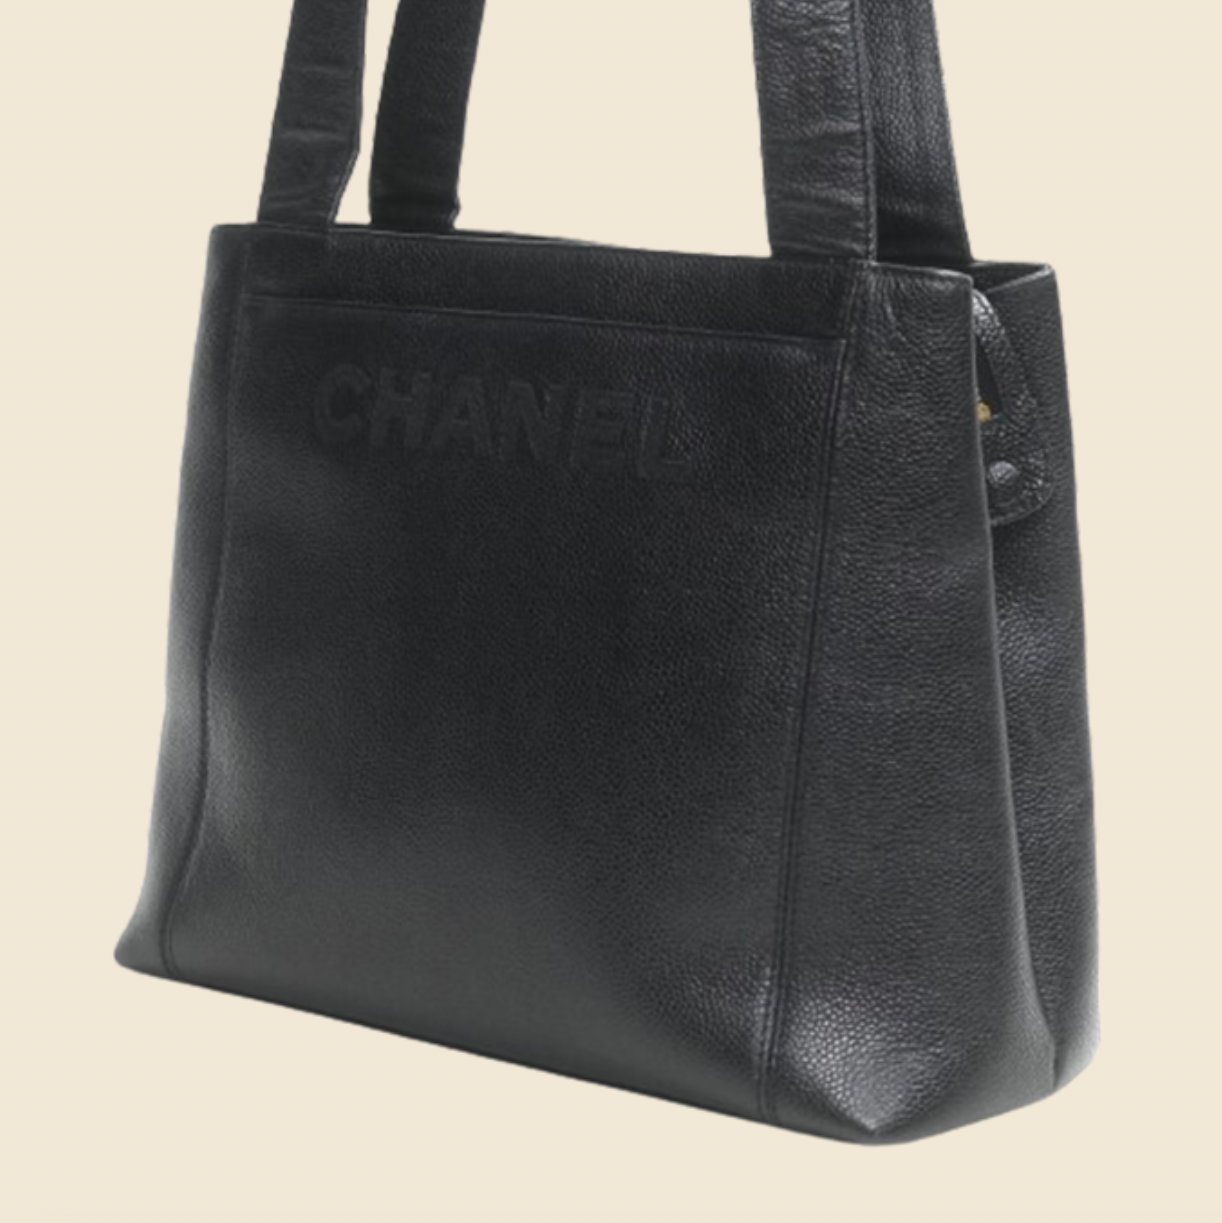 CHANEL 1990s EMBROIDERED BLACK CAVIAR LEATHER TOTE BAG